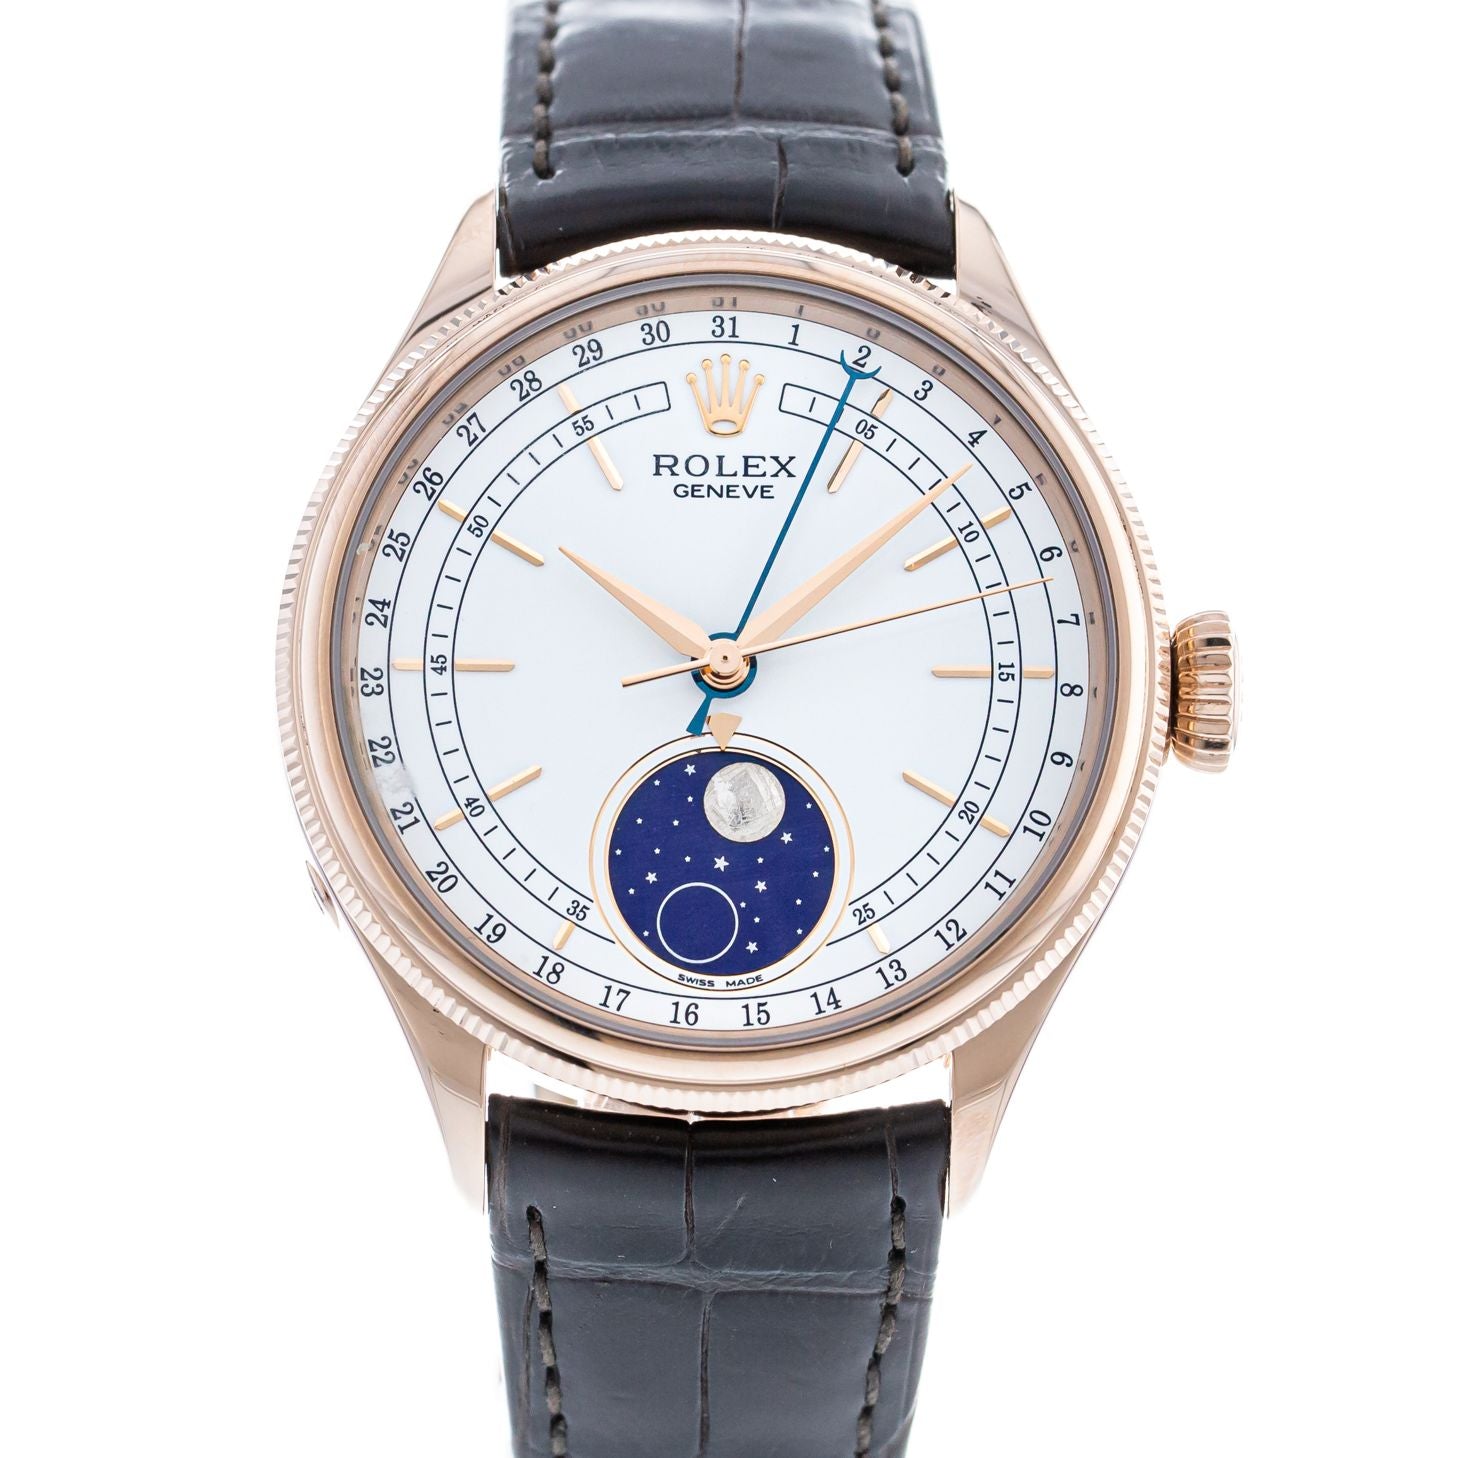 Rolex Cellini Moonphase 50535 Watch 